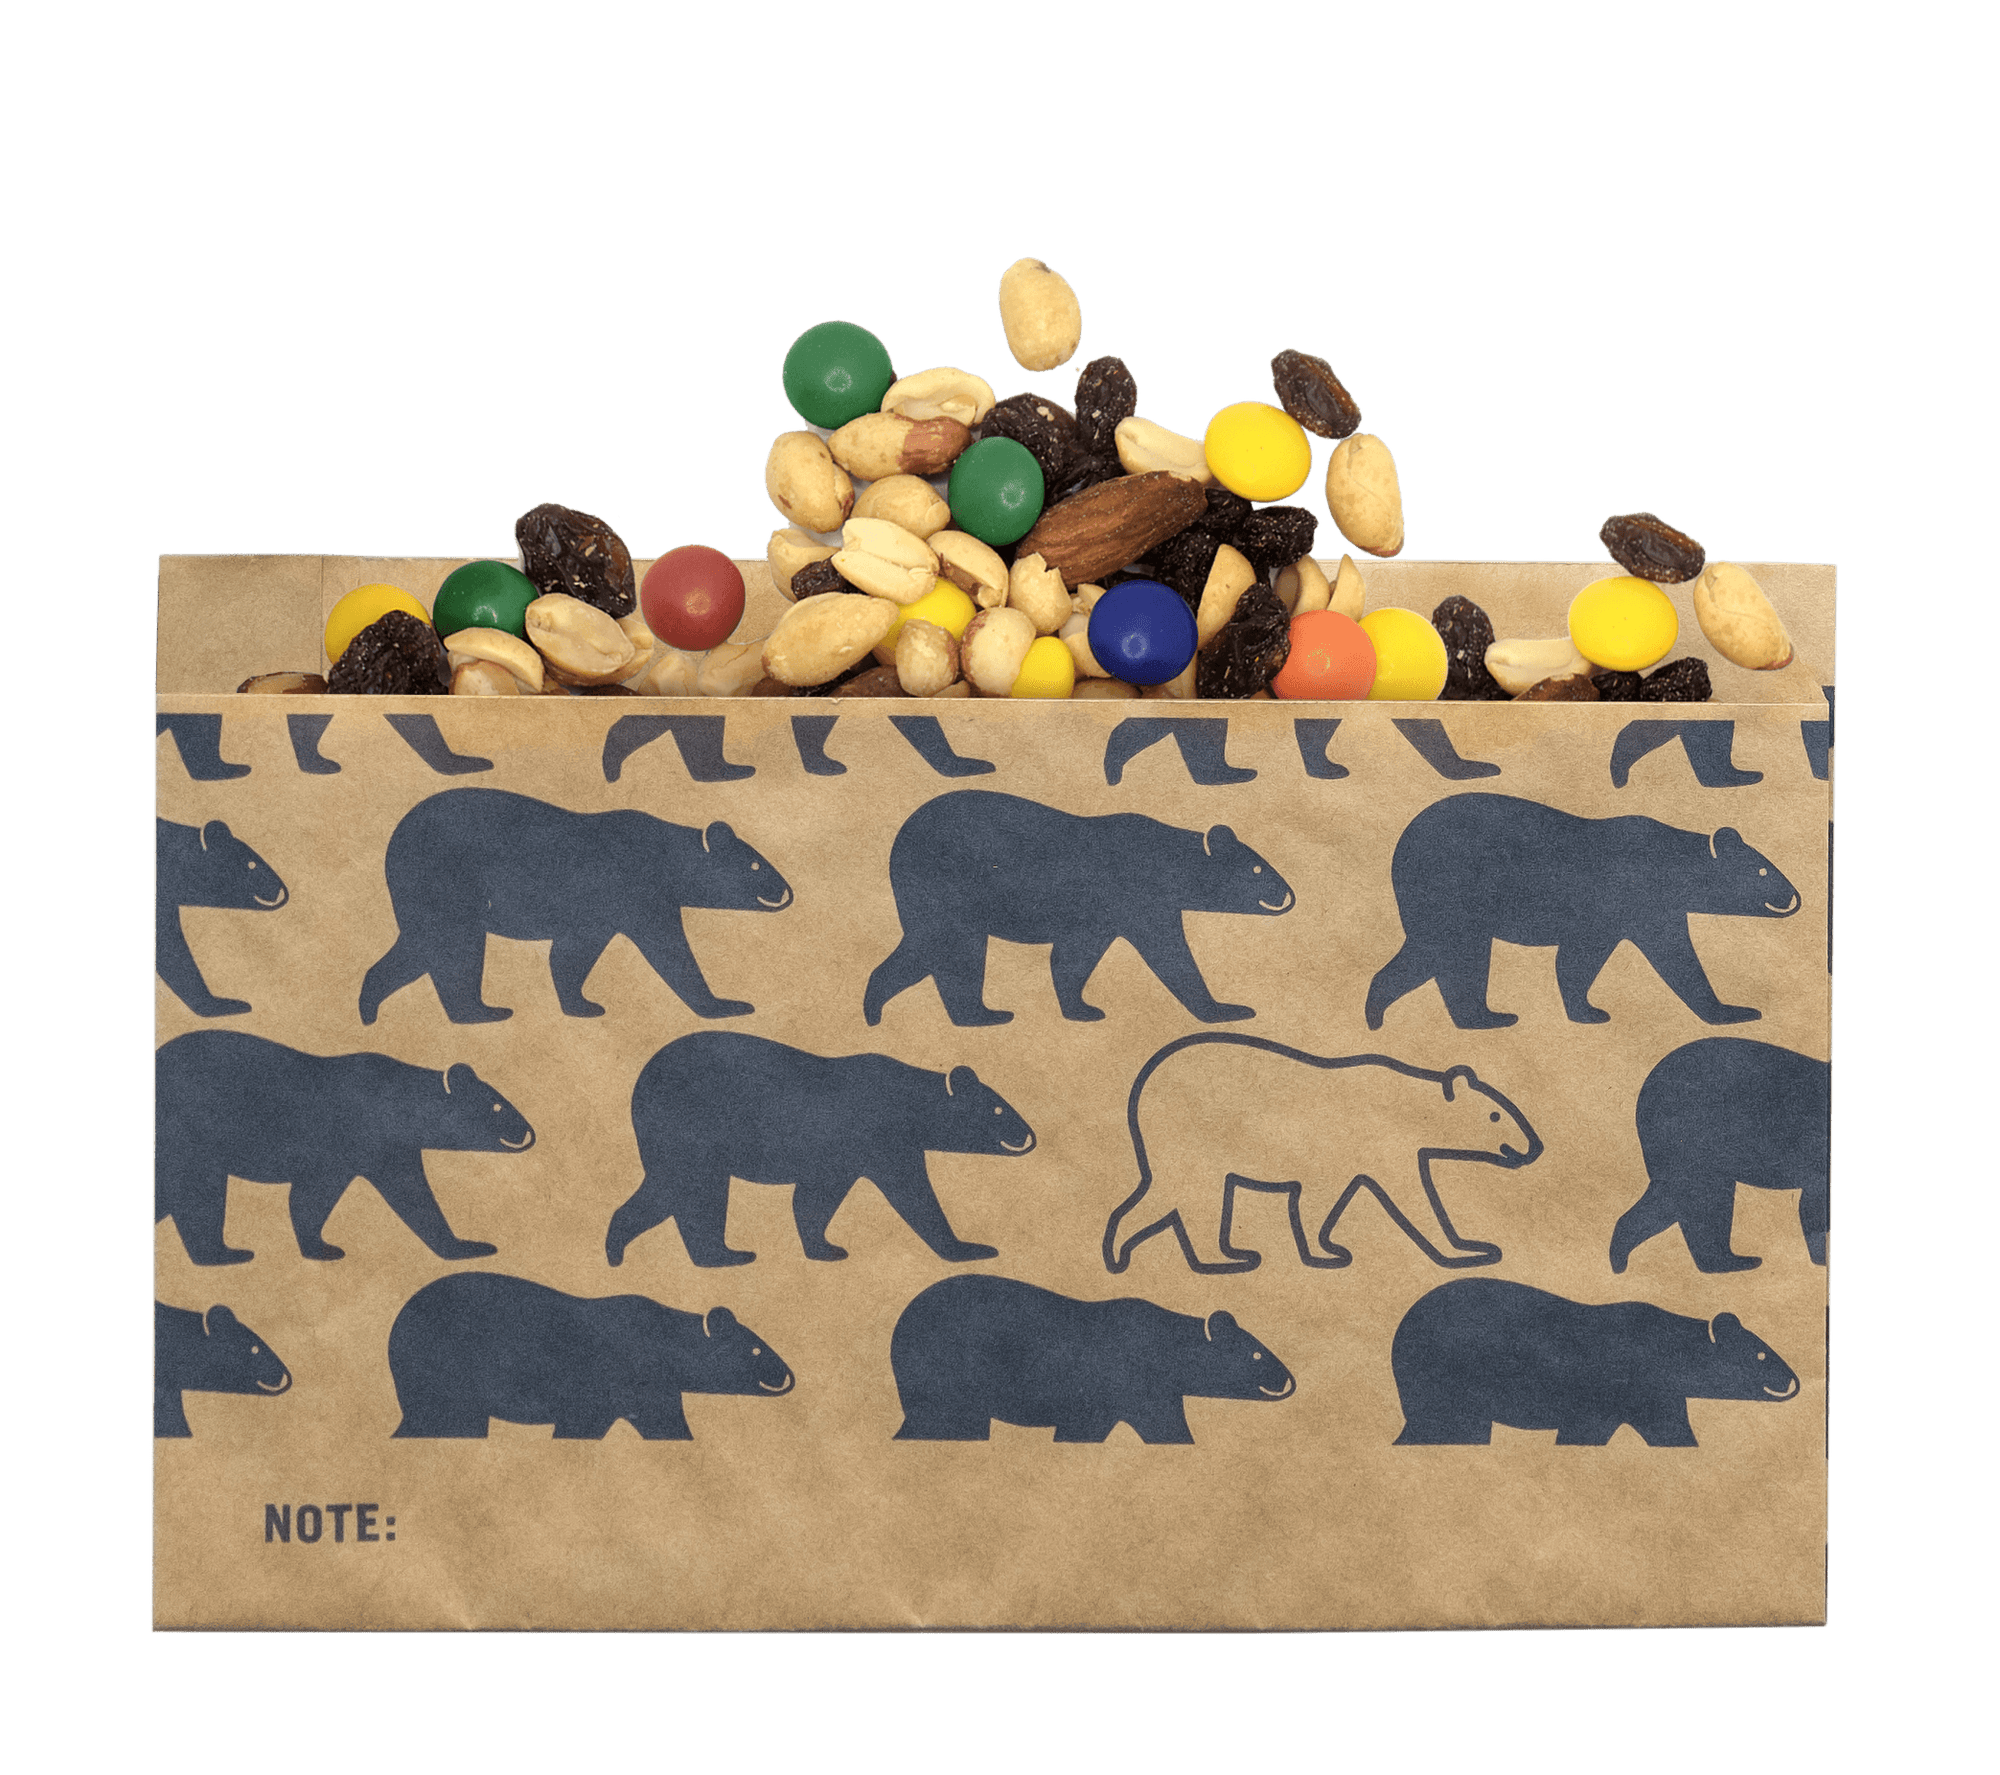 Compostable Food Storage Snack Bags – Lunchskins